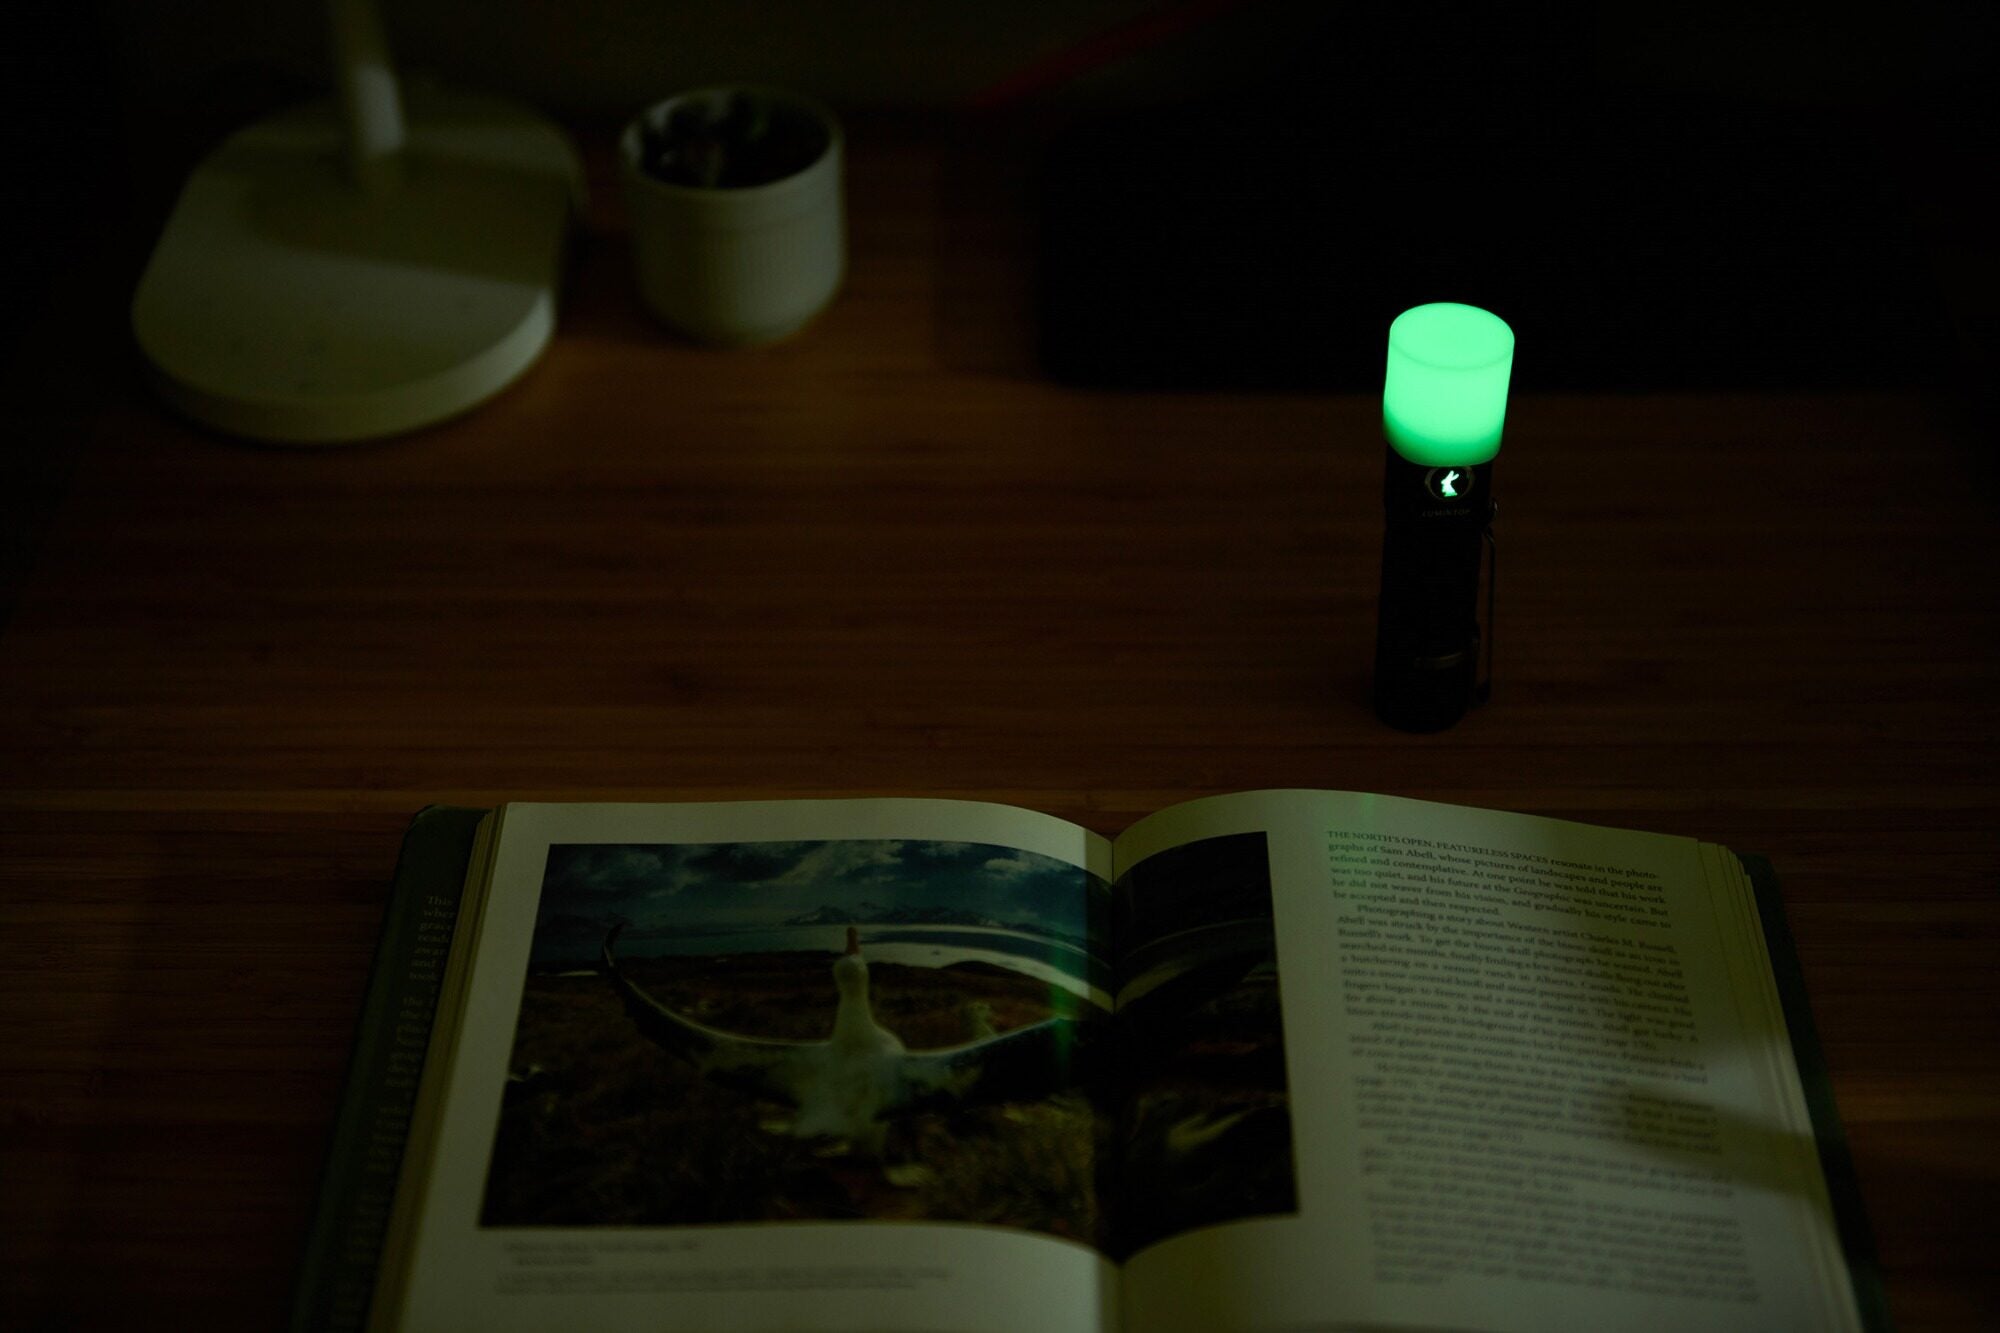 Glow Diffuser for EDC Flashlight - Lumintop Official Online Store